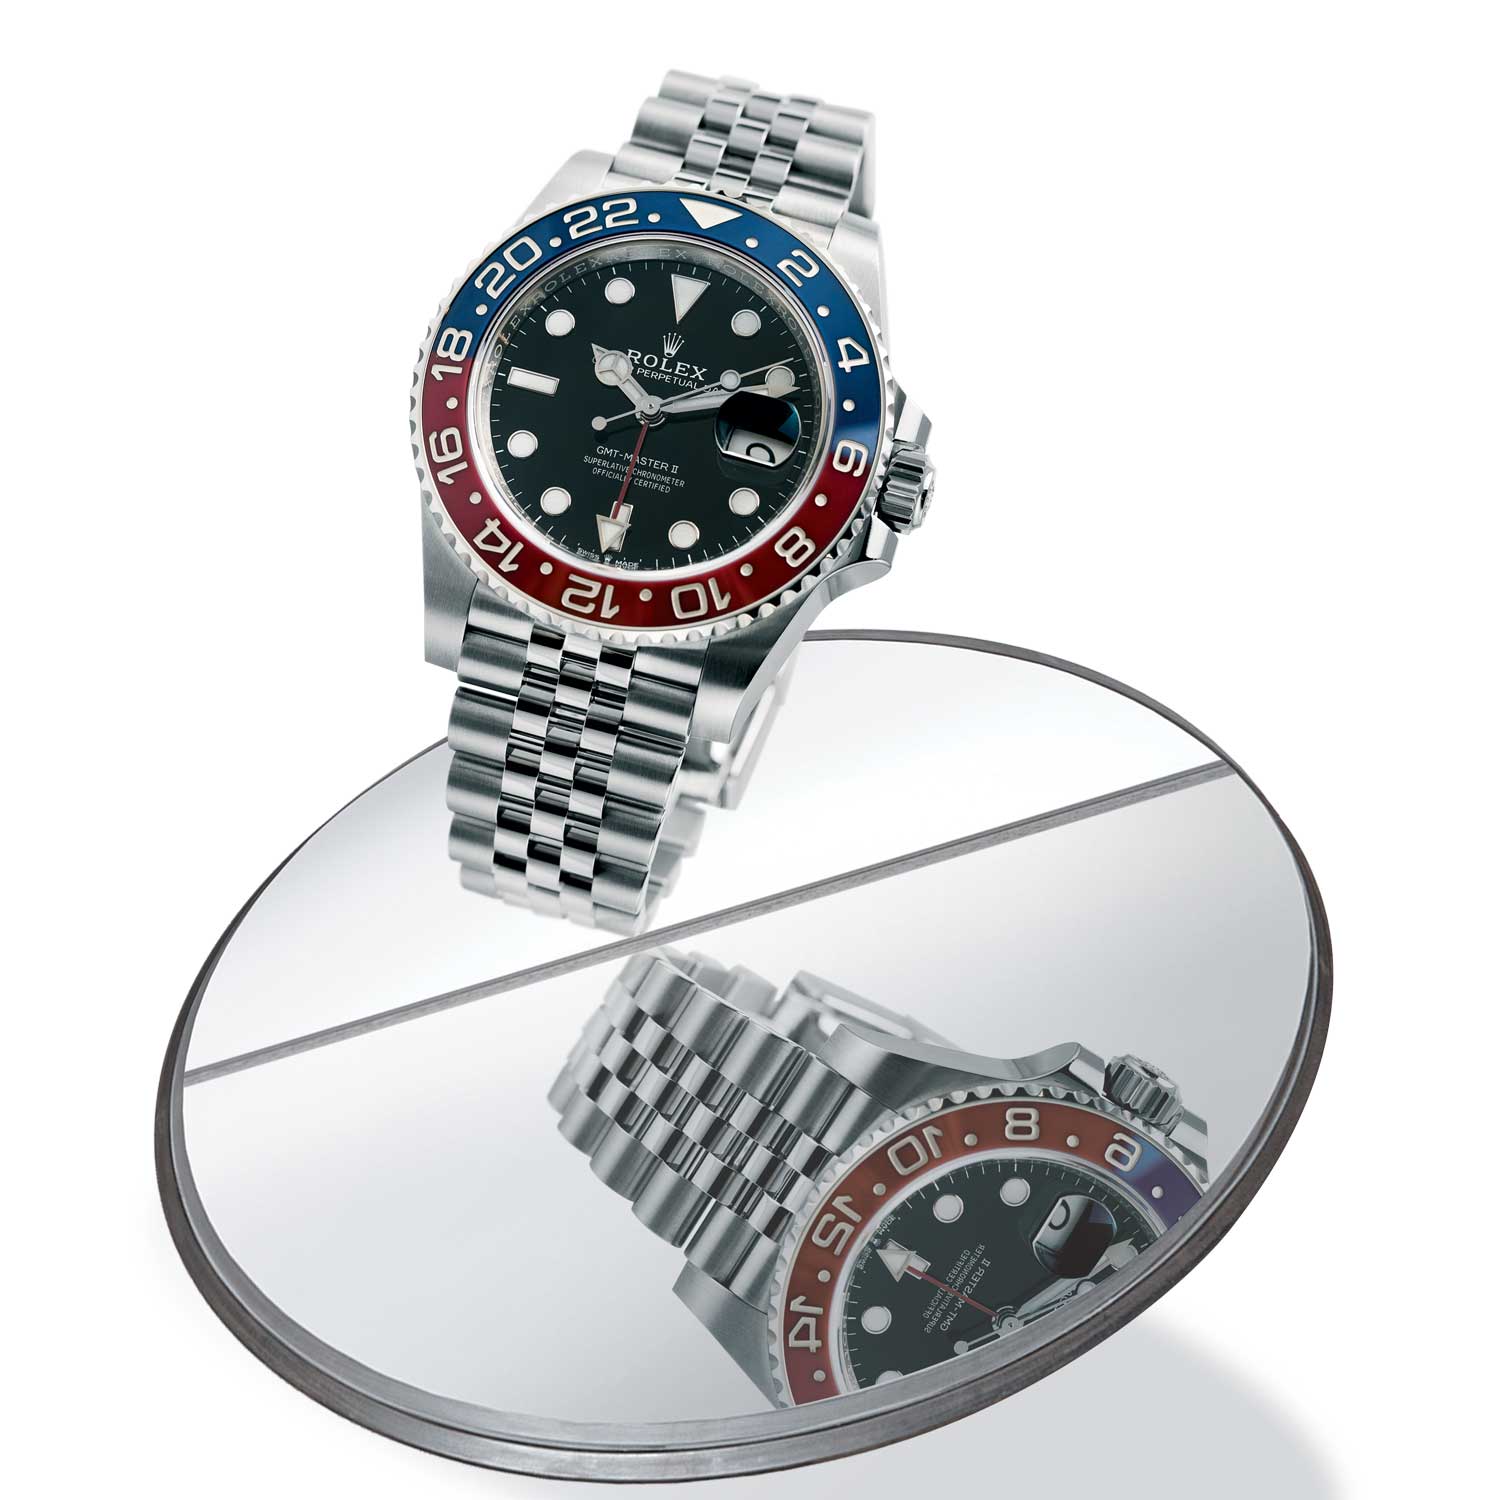 Current watches, such as this 126710 “Pepsi” GMT-Master II, will be available in the Certified Pre-Owned offer, as long as they are over three years old